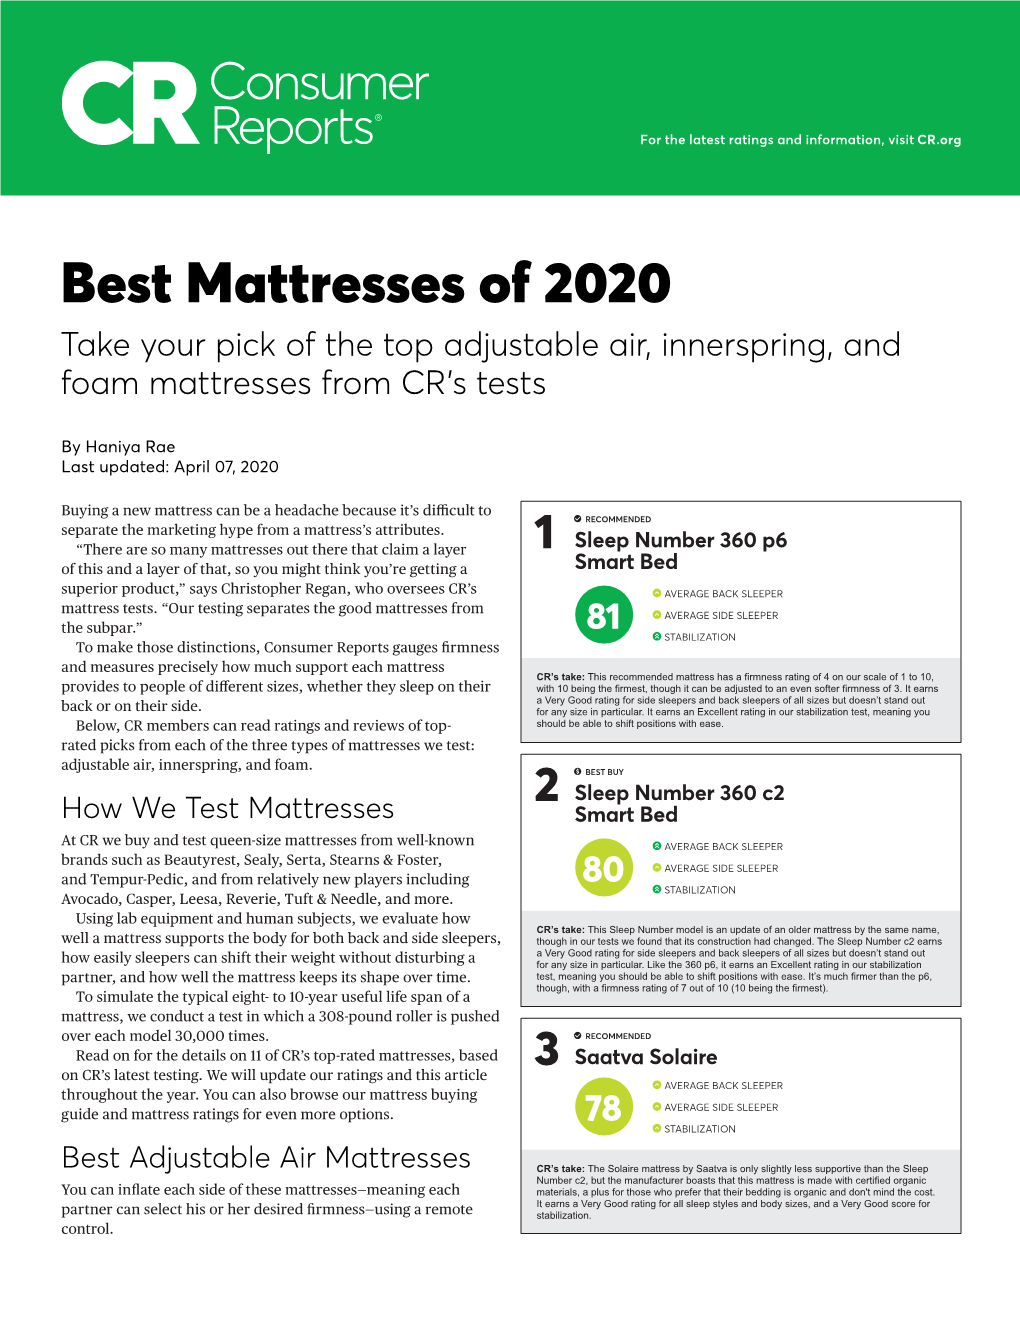 Best Mattresses of 2020 Take Your Pick of the Top Adjustable Air, Innerspring, and Foam Mattresses from CR's Tests